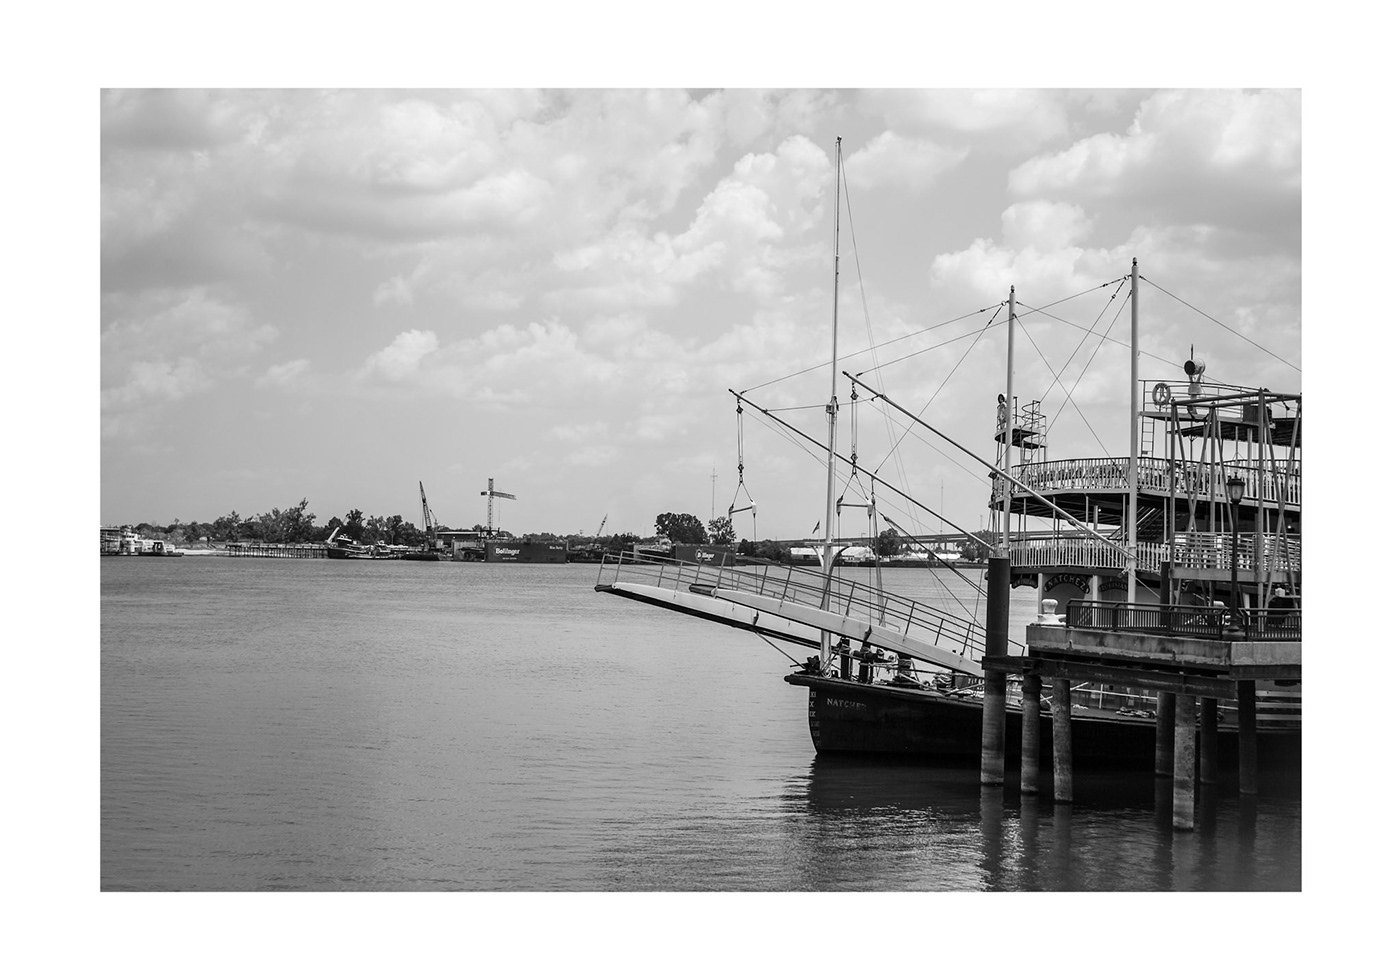 A historic ship docked on the Mississippi River in the New Orleans French Quarter.